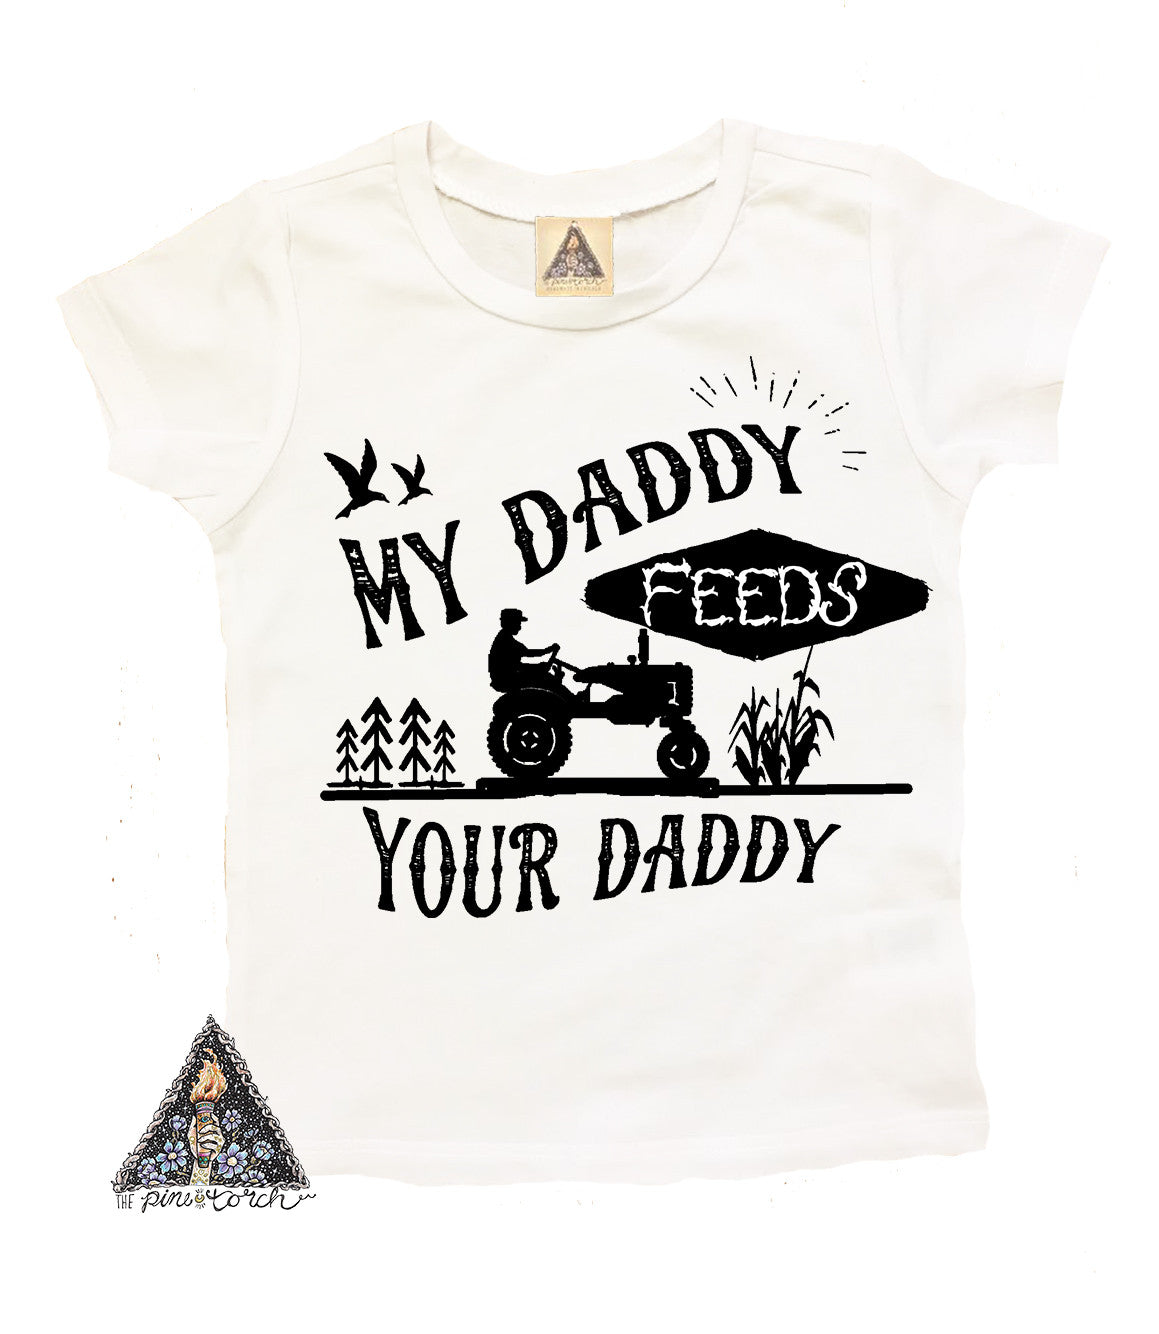 « MY DADDY FEEDS YOUR DADDY » KID'S TEE